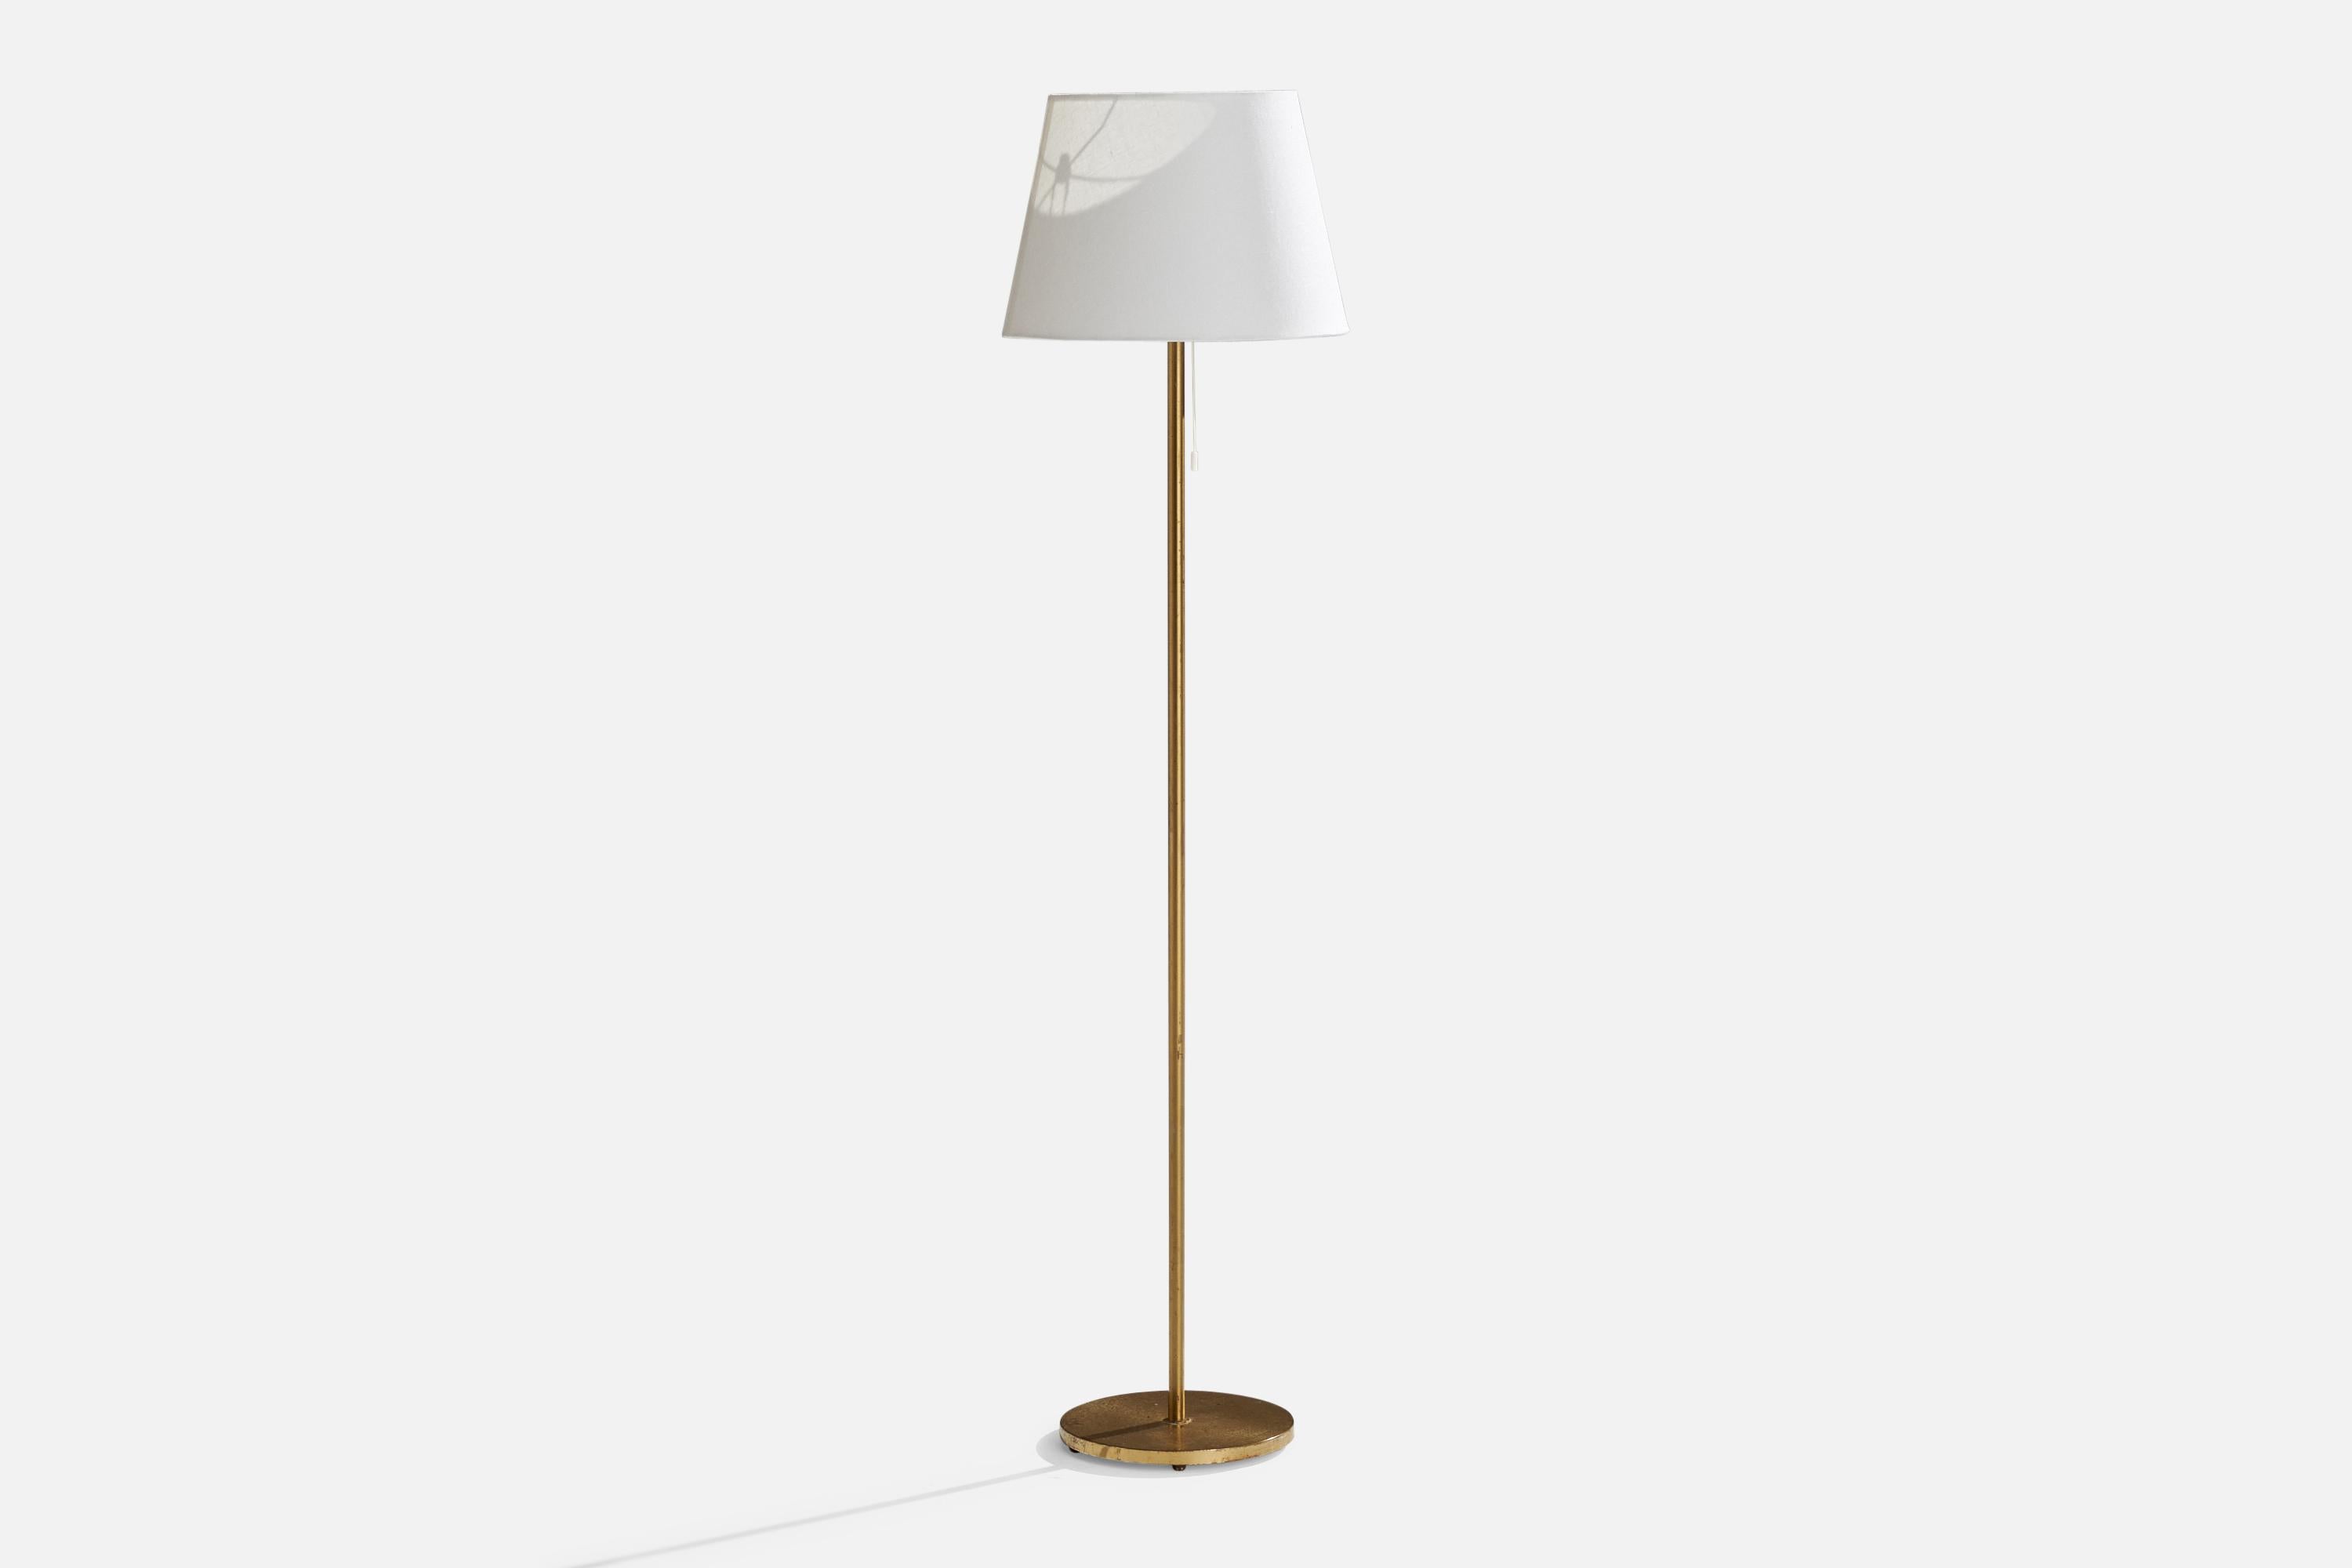 A brass and white fabric floor lamp designed and produced by Möllers Elekriska Armatur, Sweden, c. 1950s.

Overall Dimensions (inches): 56.5” H x 14” W x 7” D
Stated dimensions include shade.
Bulb Specifications: E-26 Bulb
Number of Sockets: 1
All